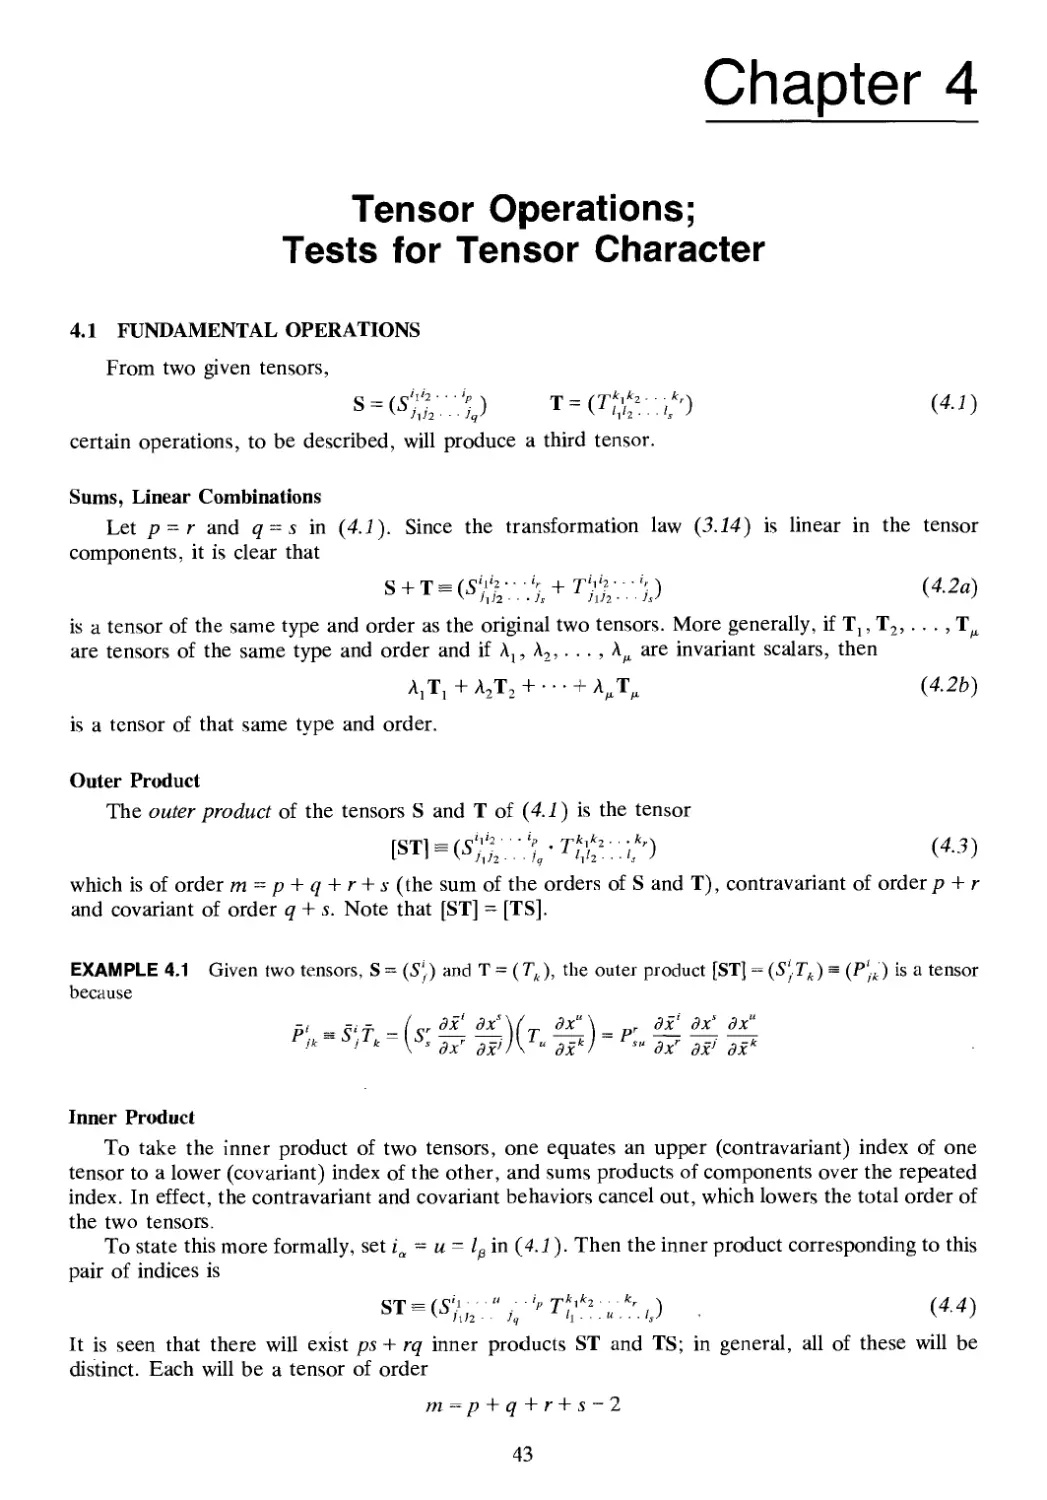 Chapter 4 TENSOR OPERATIONS: TESTS FOR TENSOR CHARACTER